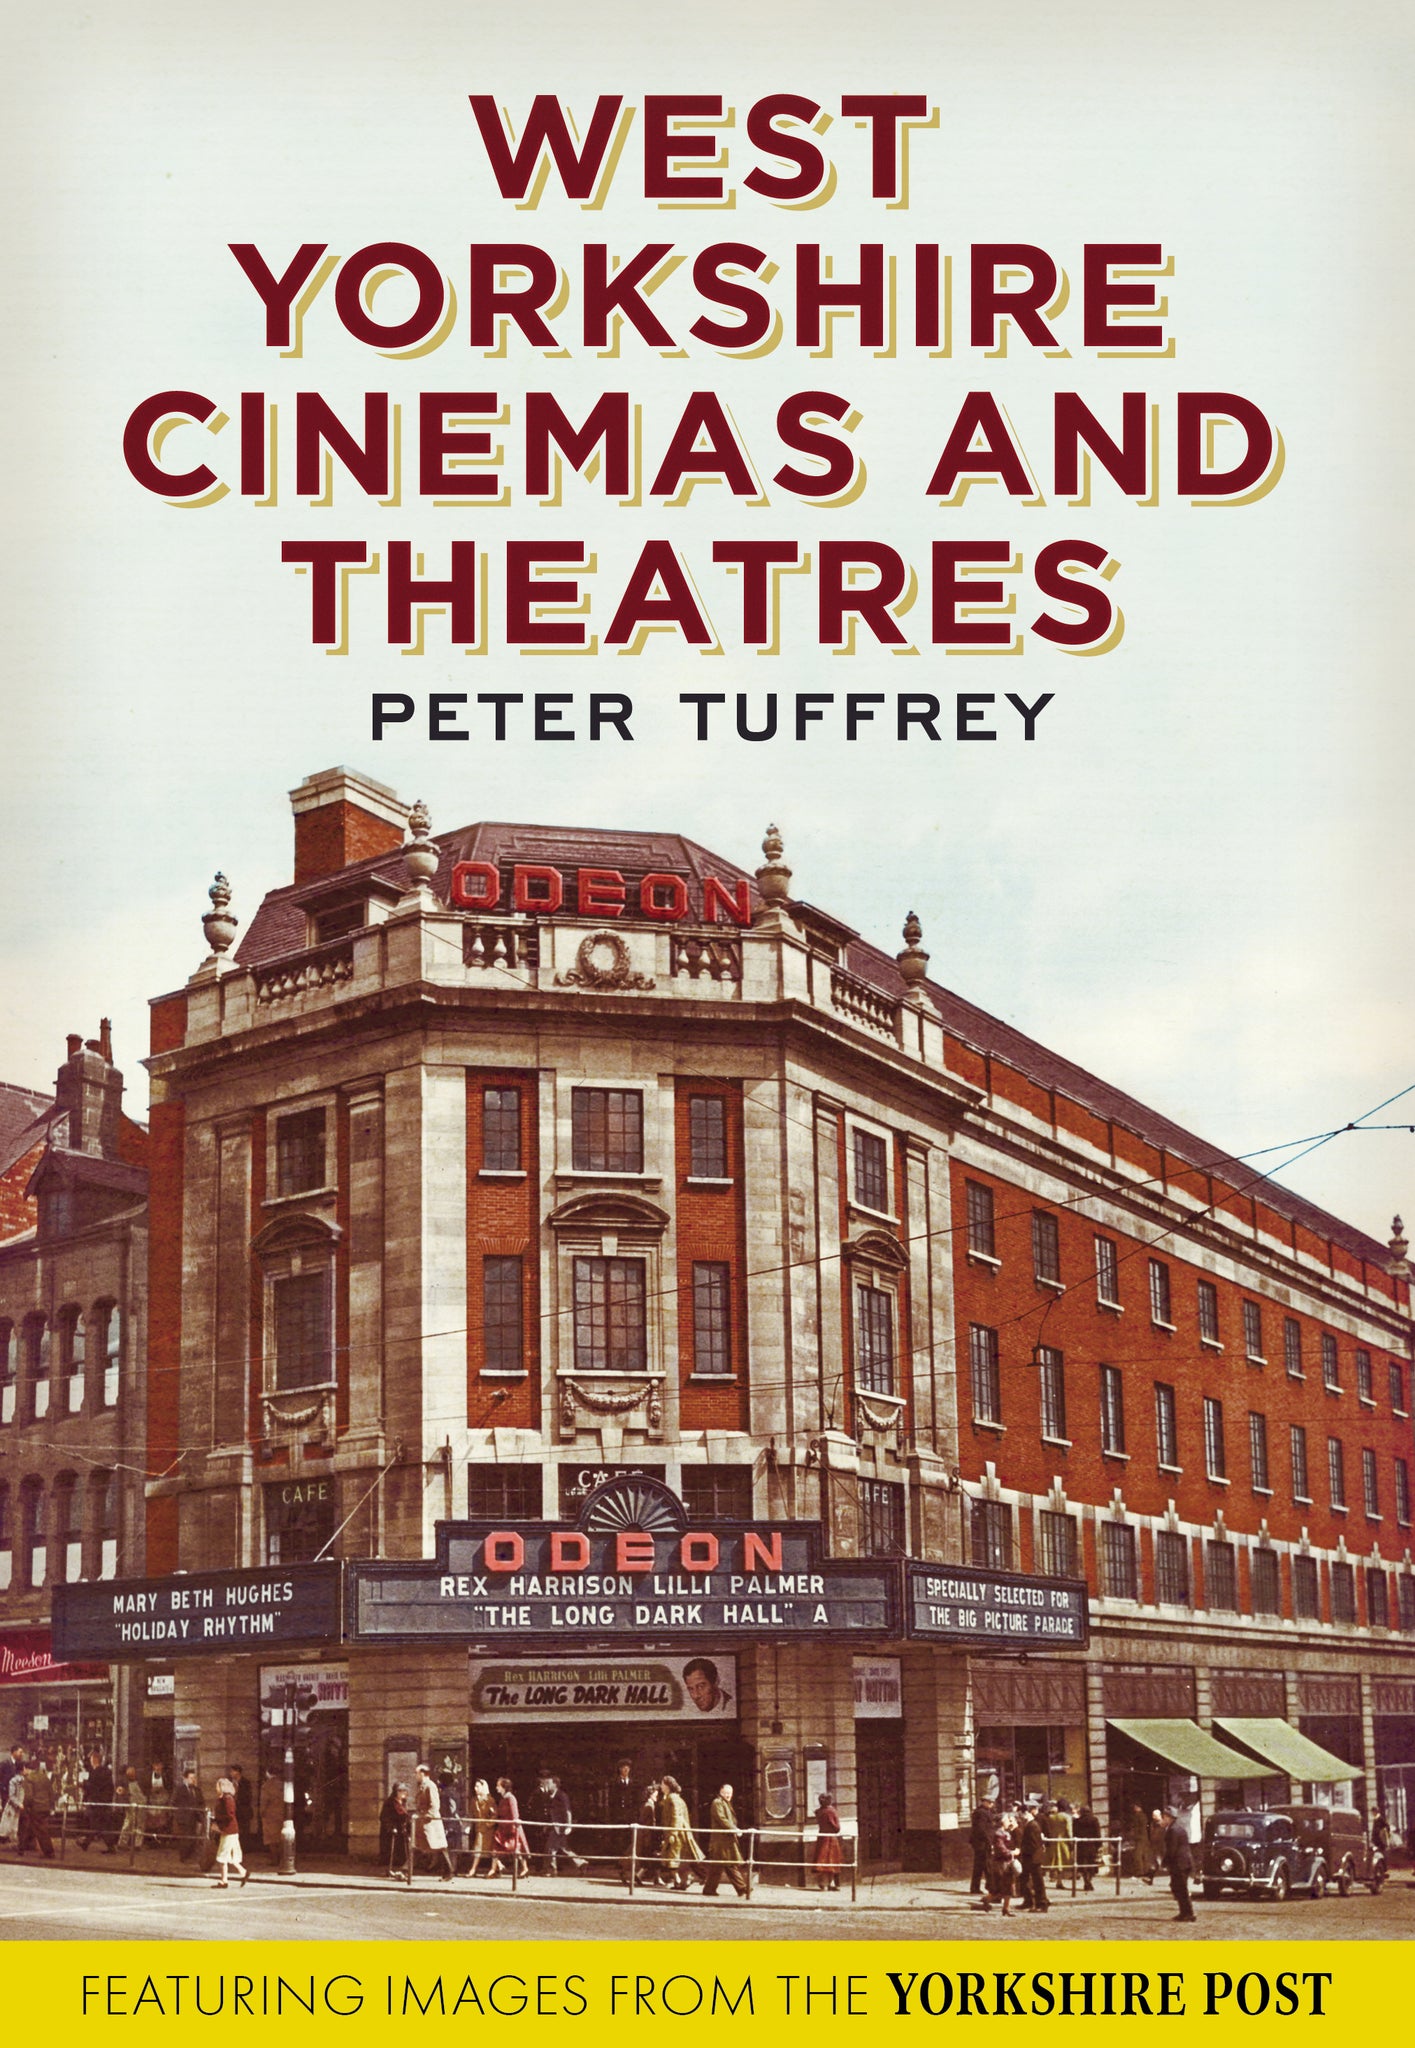 West Yorkshire Cinemas and Theatres